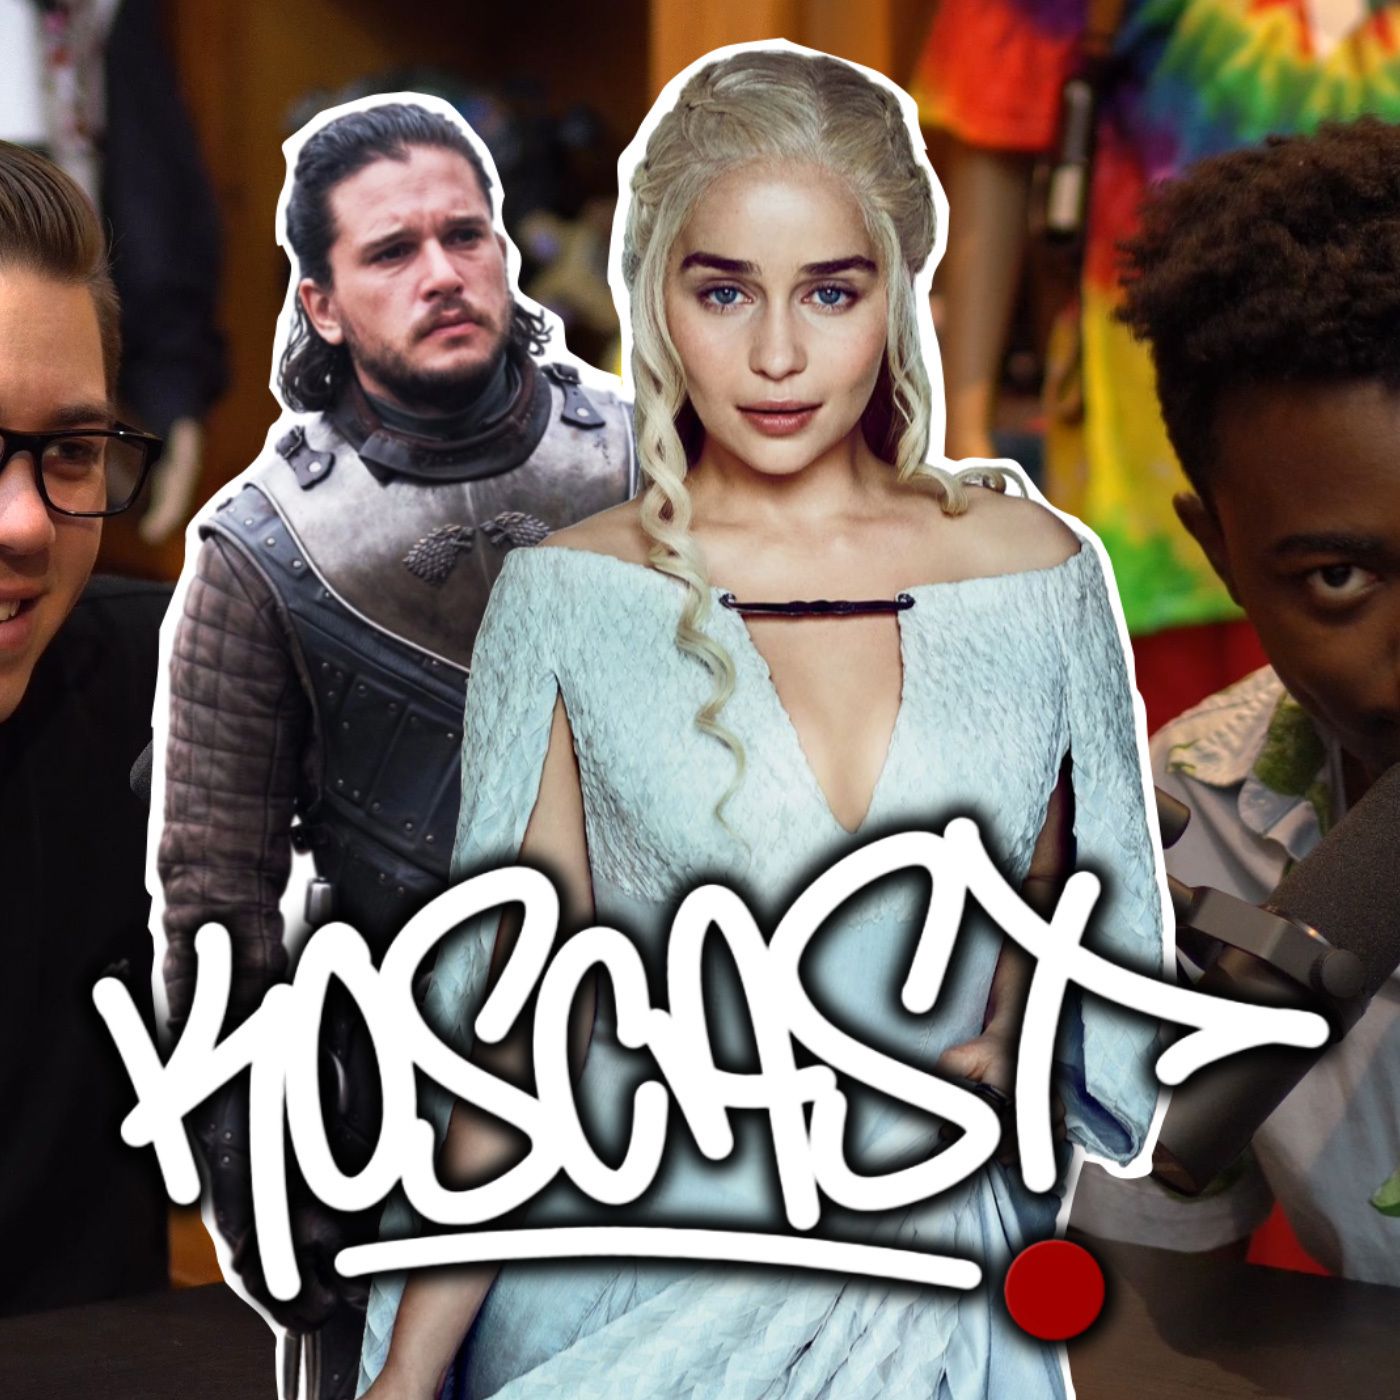 3: #KOSCAST with WhosChaos: Game of Thrones THEORIES